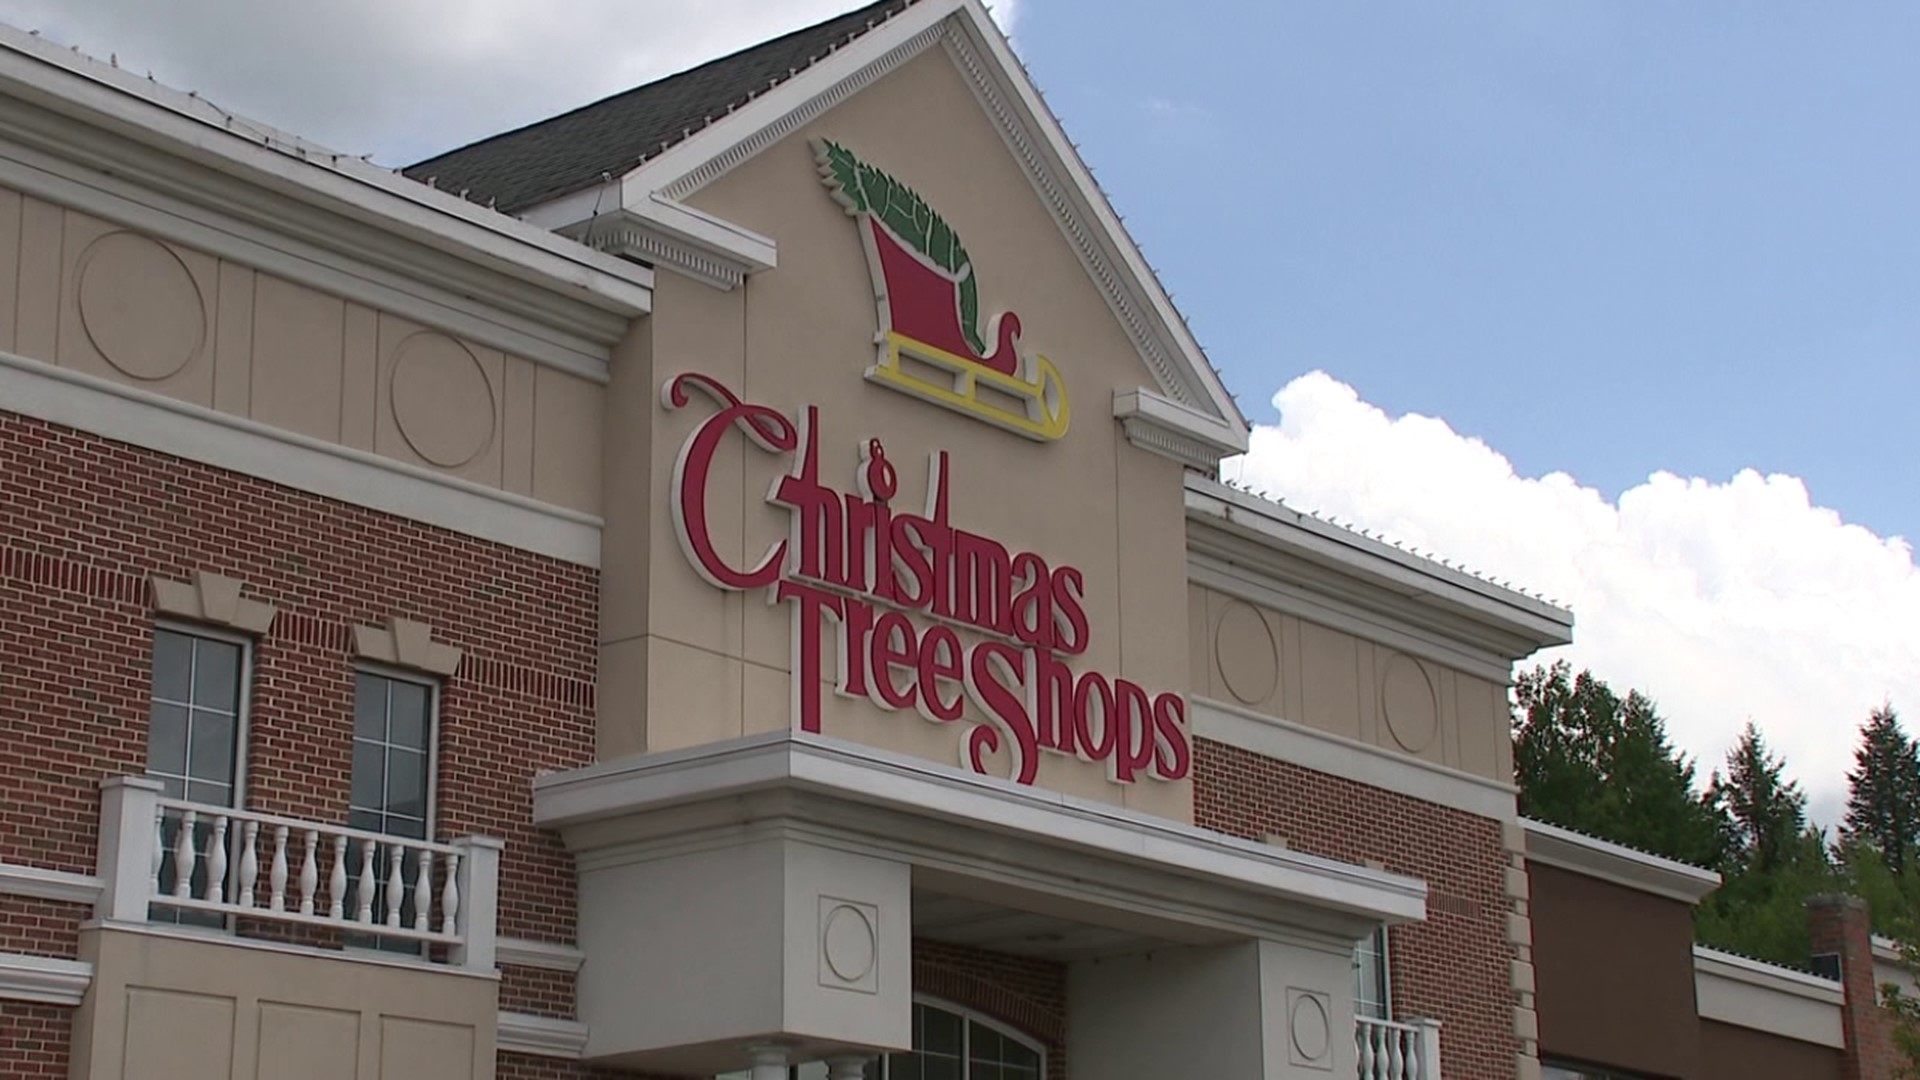 The retailer in Moosic is set to close its doors after the company filed for Chapter 11 bankruptcy in May.